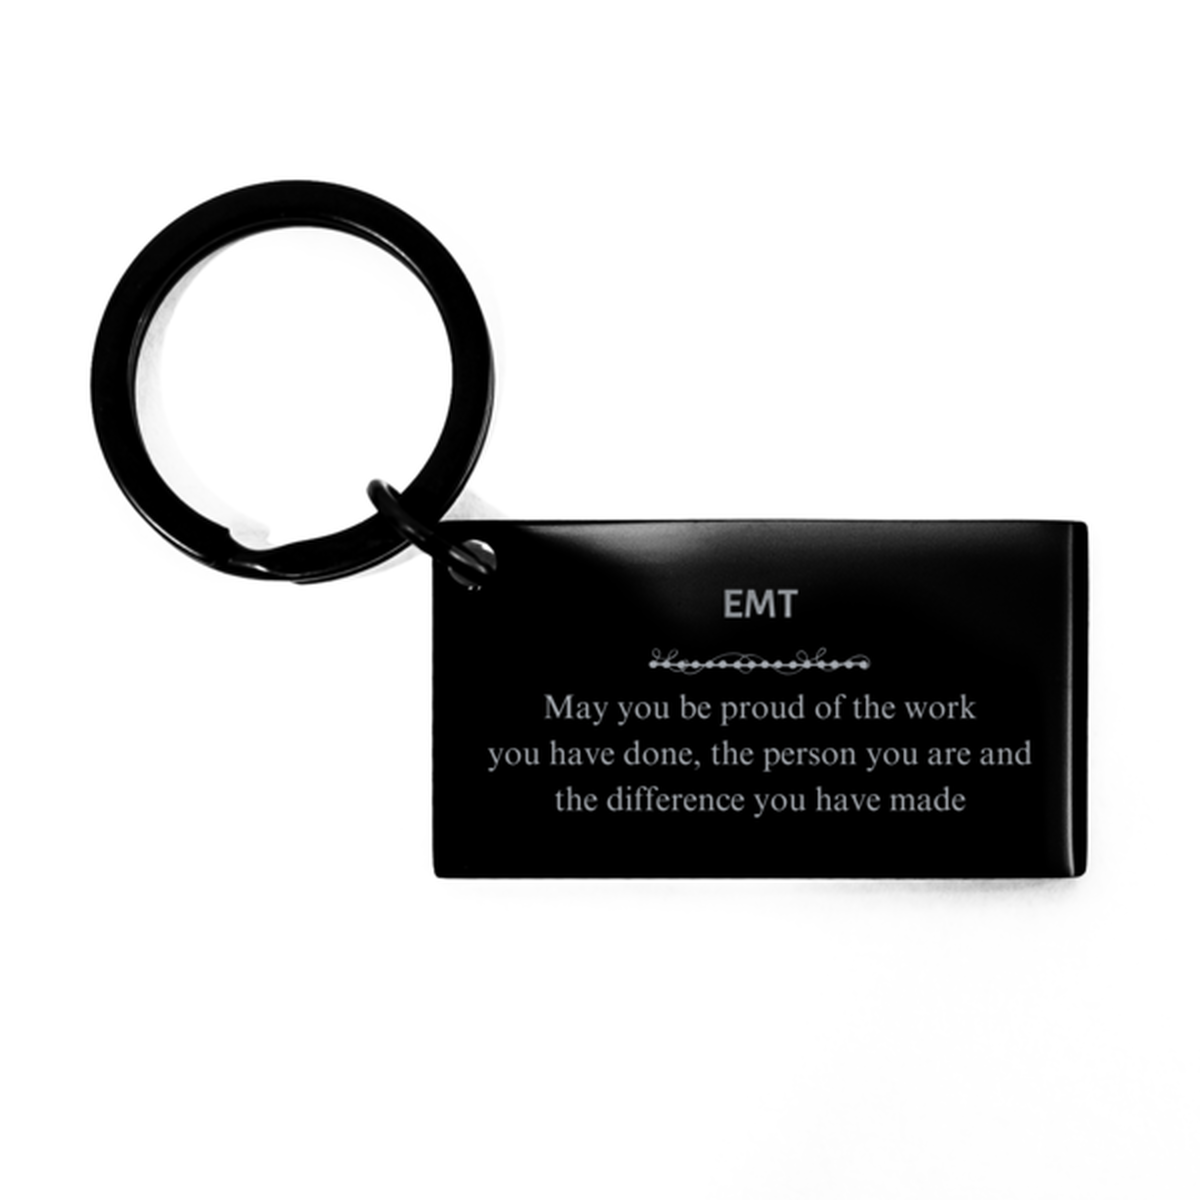 Interior Designer May you be proud of the work you have done, Retirement EMT Keychain for Colleague Appreciation Gifts Amazing for EMT